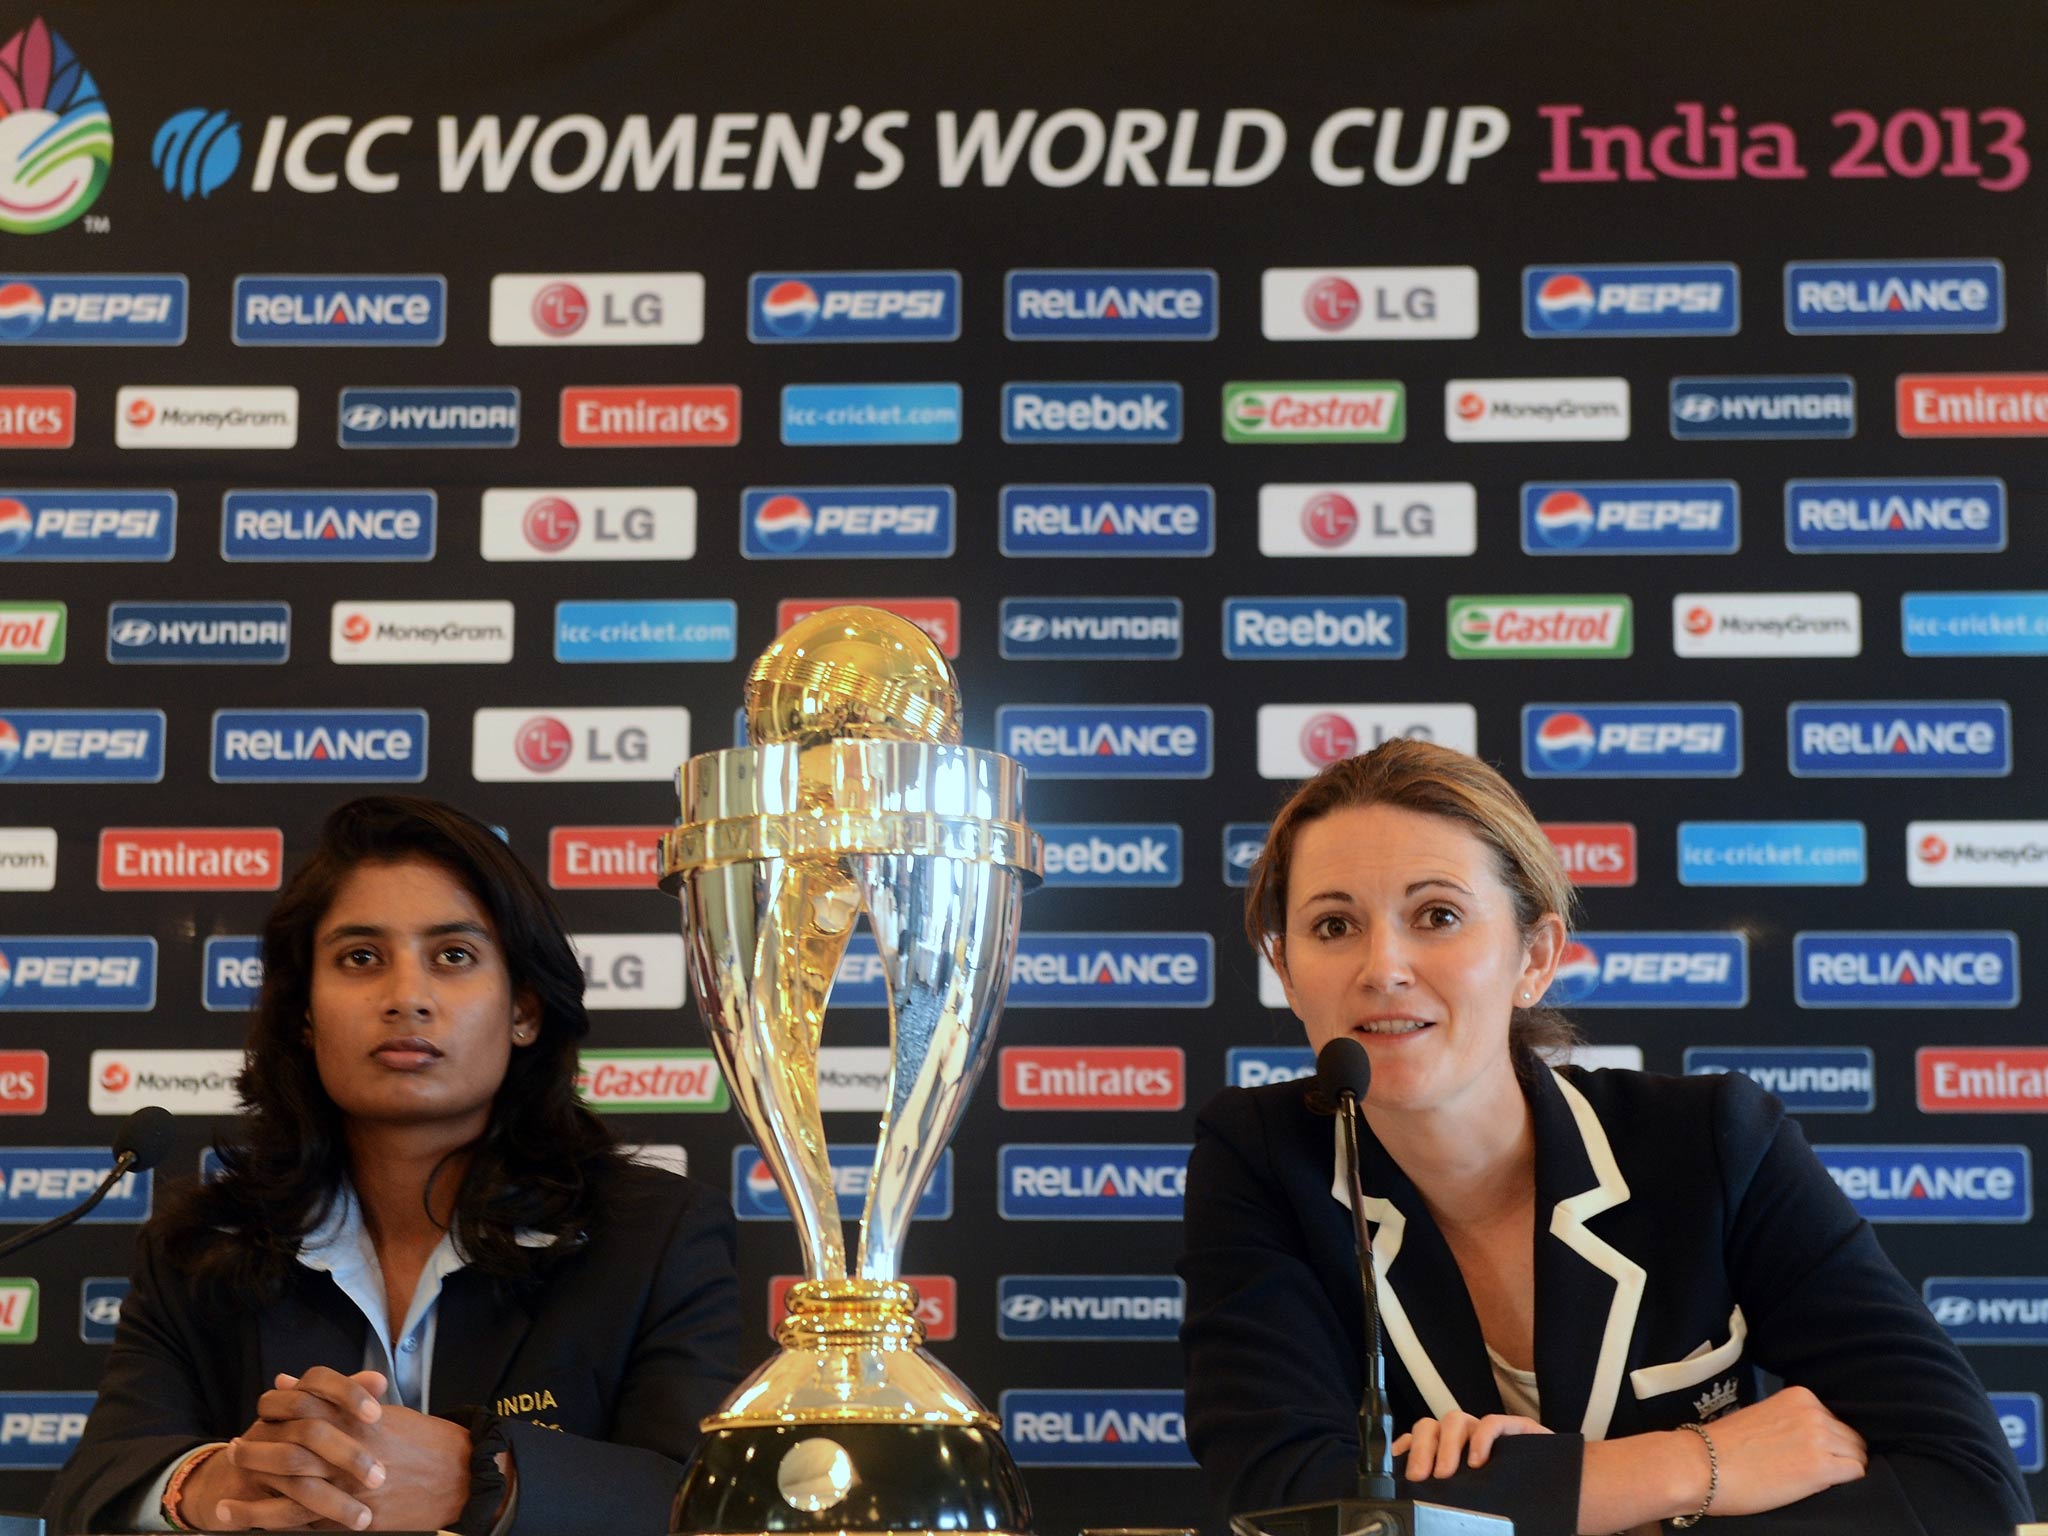 India captain Mithali Raj (L) looks on as England captain Charlotte Edwards speaks ahead of the women's cricket World Cup